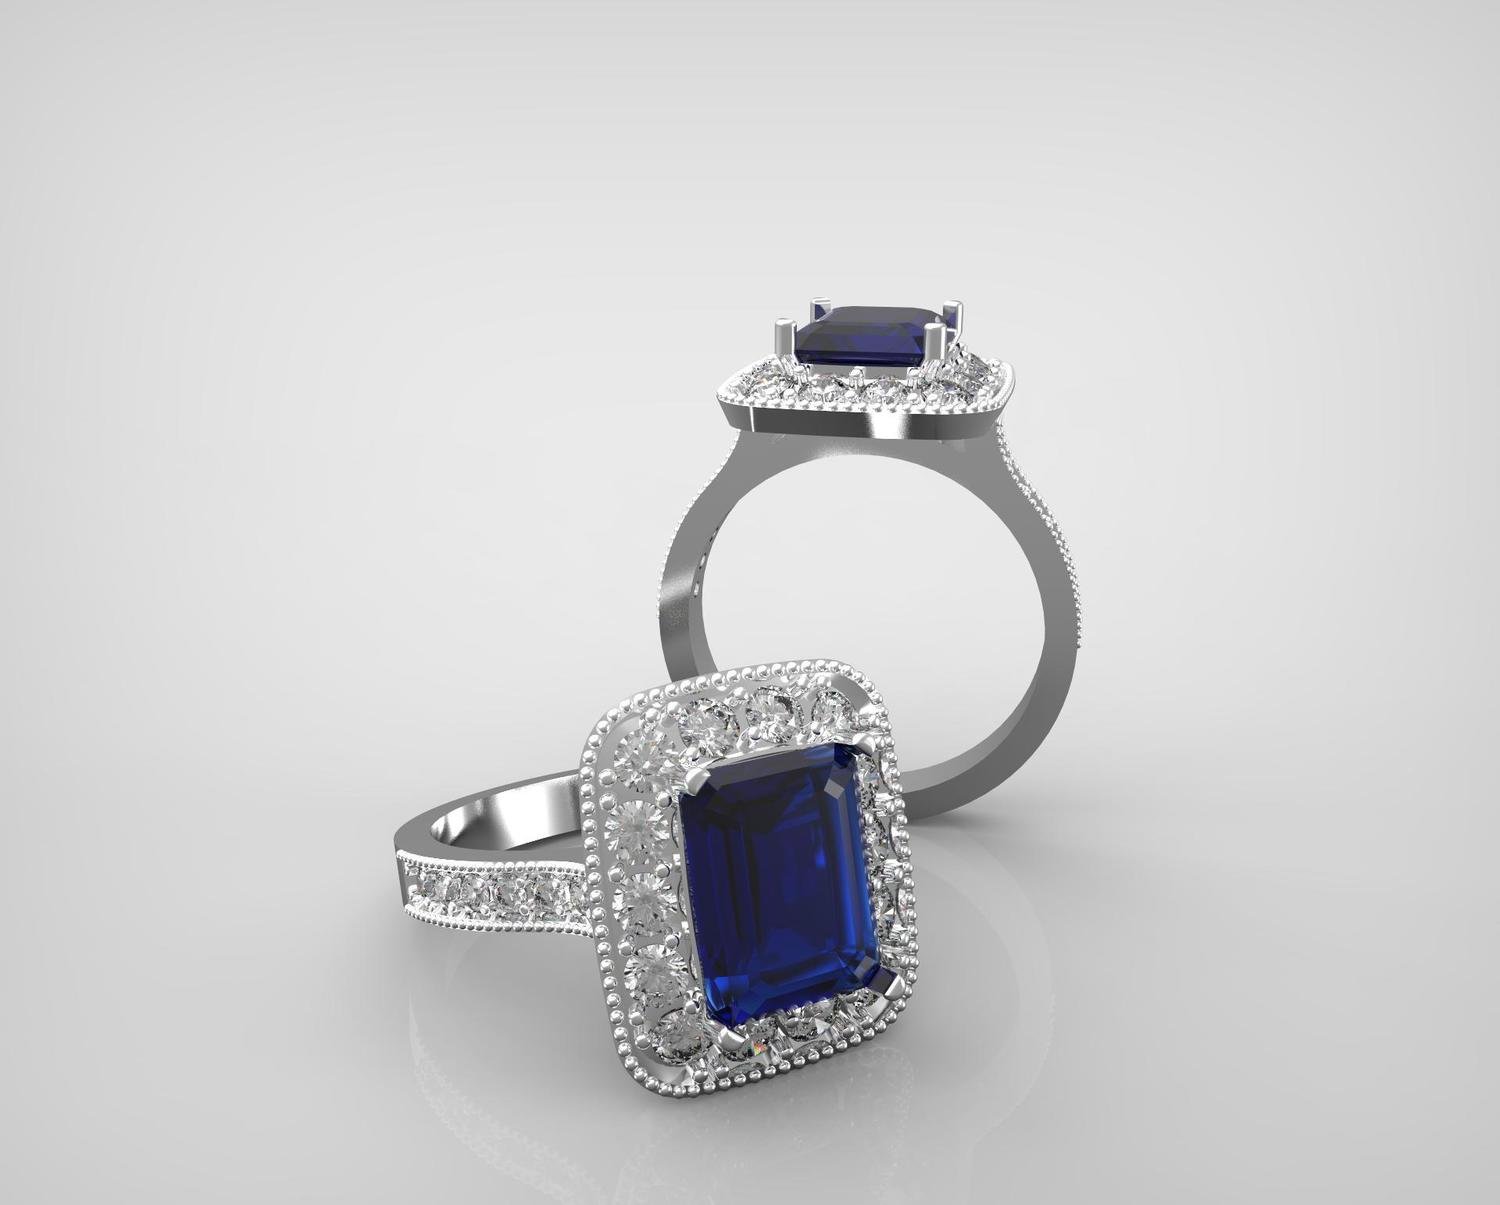 3D CAD Model of Diamond Engagement Ring